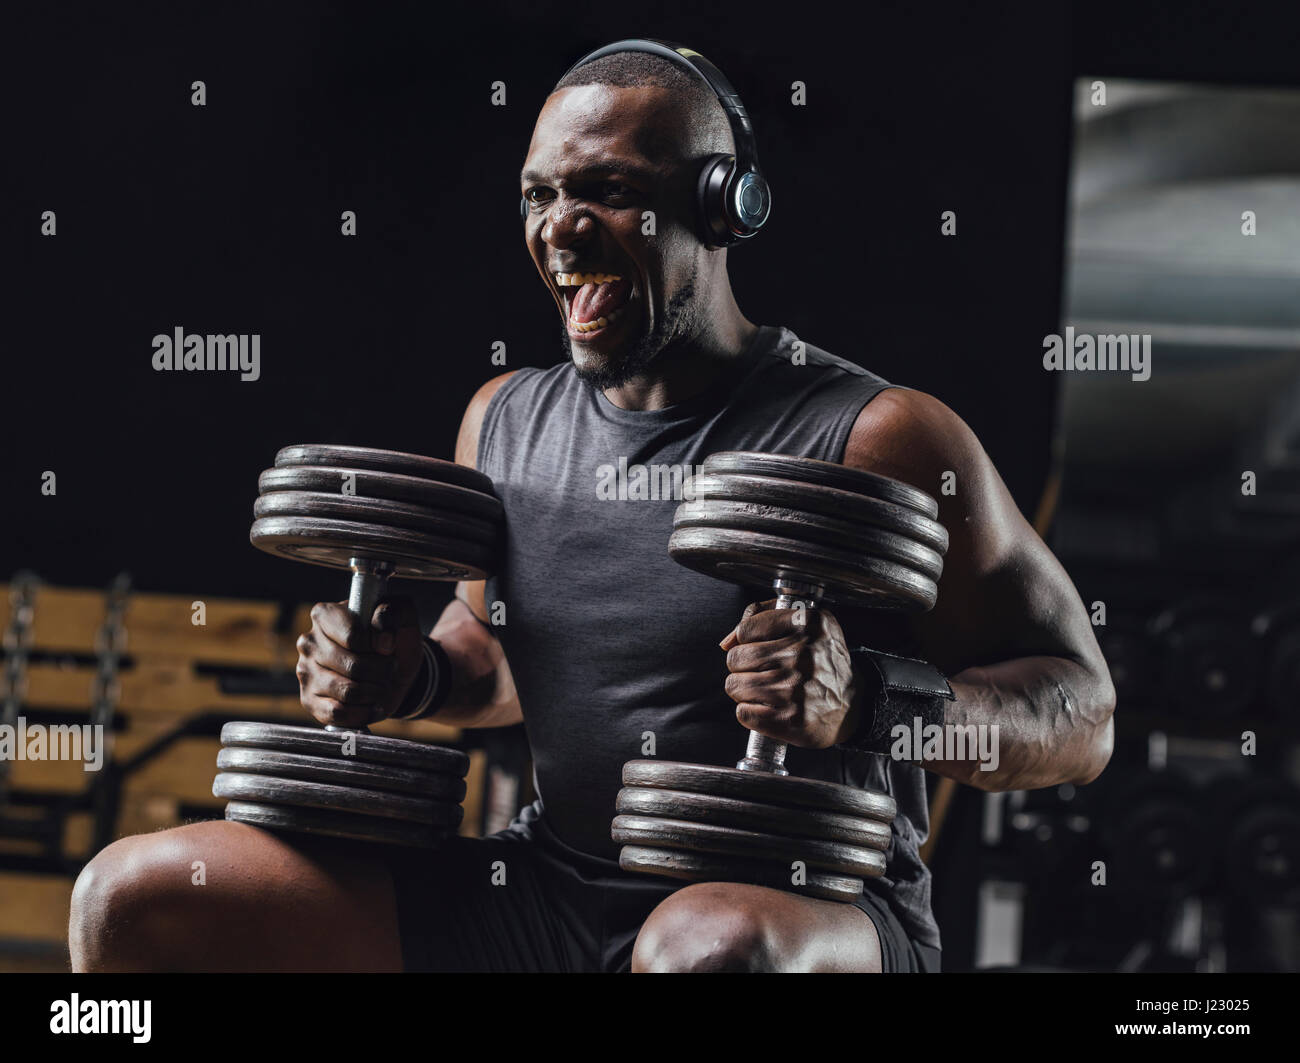 Athlete training with dumbbells in gym, screaming Stock Photo